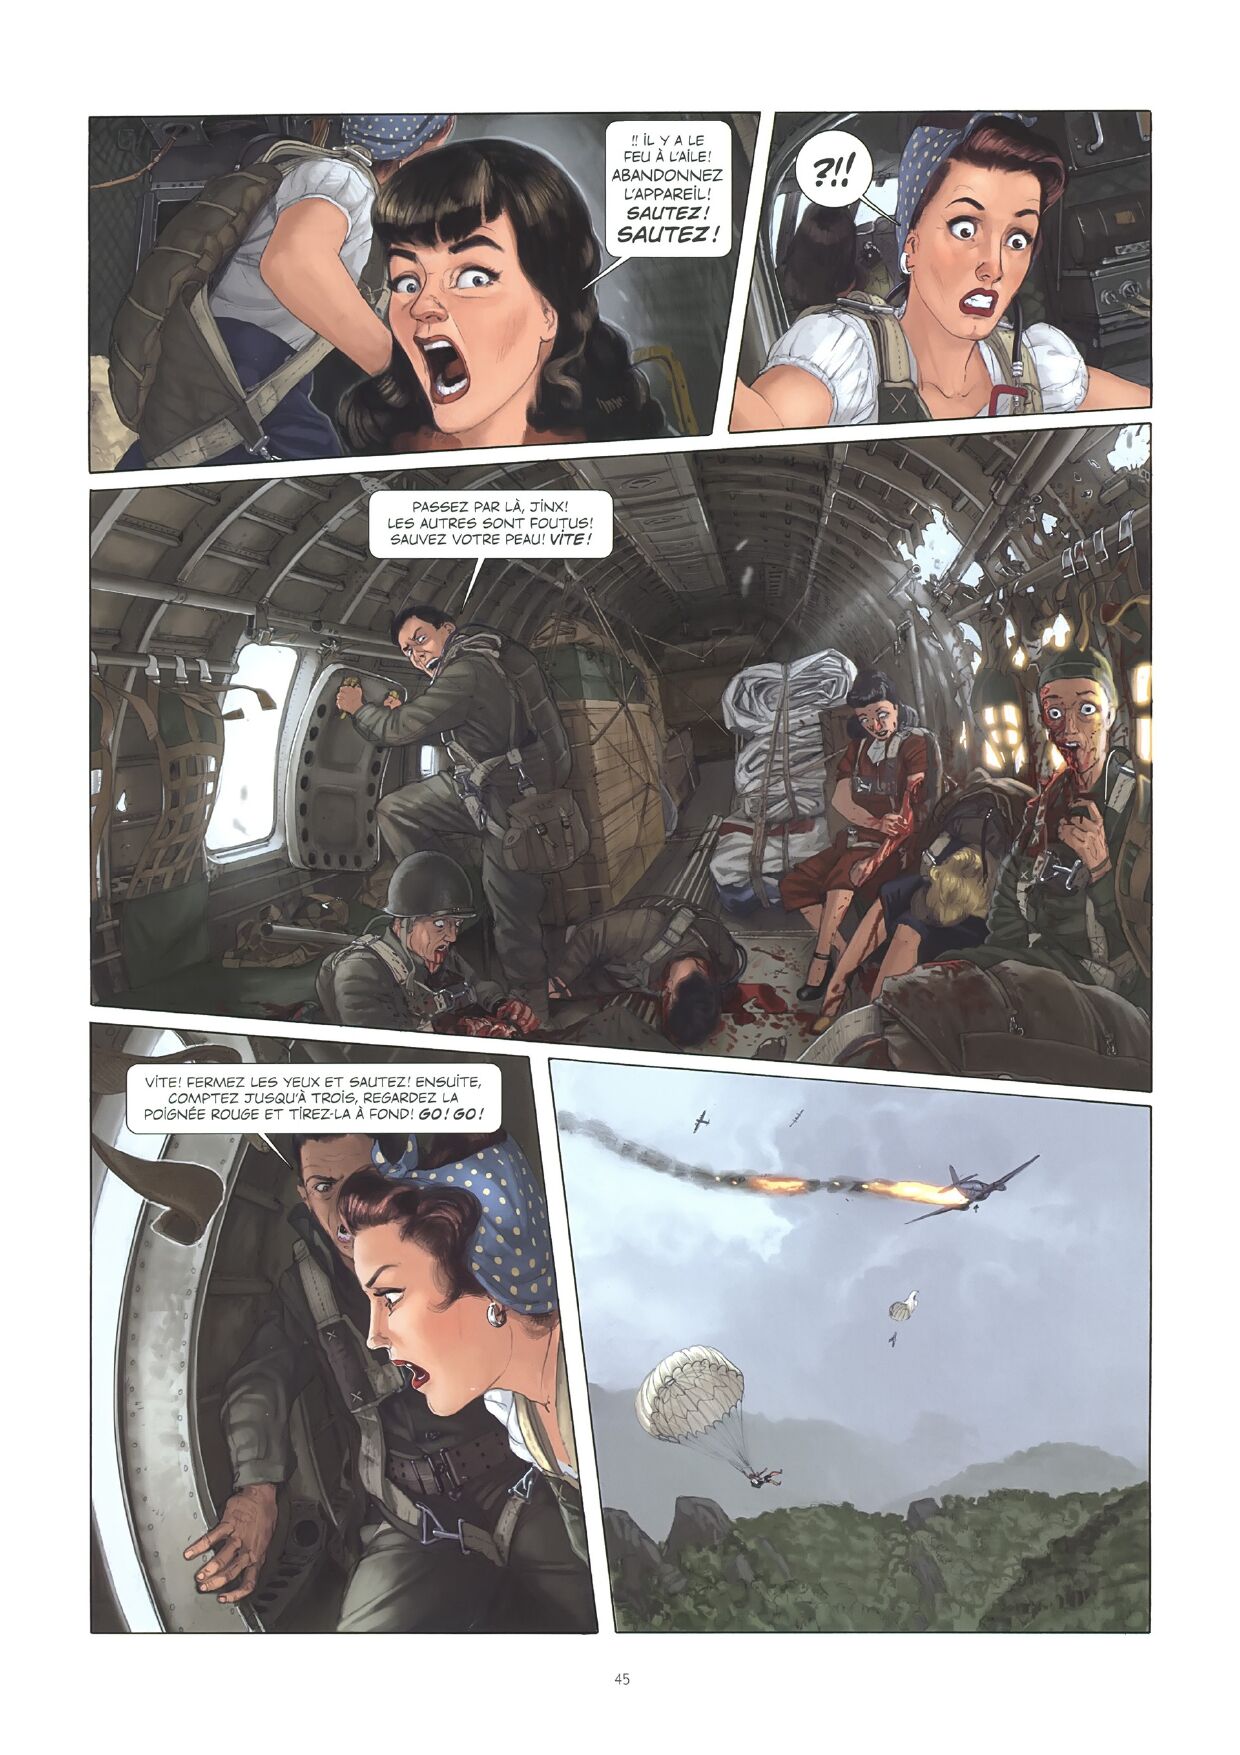 Angel Wings tome2 black widow numero d'image 46